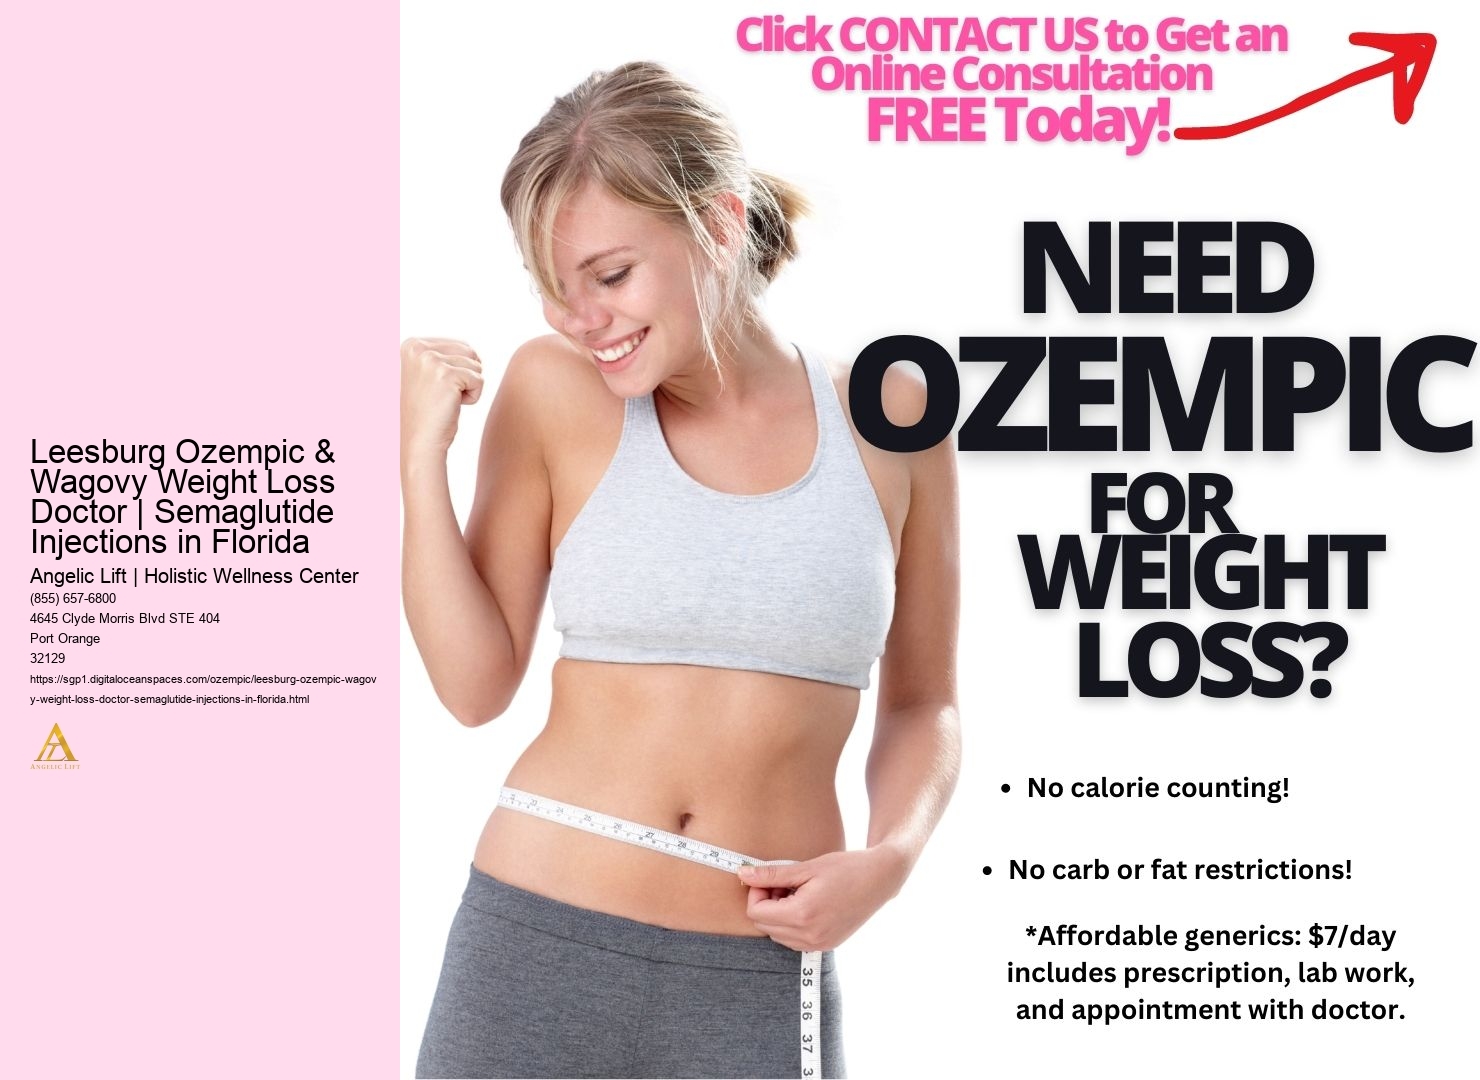 Leesburg Ozempic & Wagovy Weight Loss Doctor | Semaglutide Injections in Florida